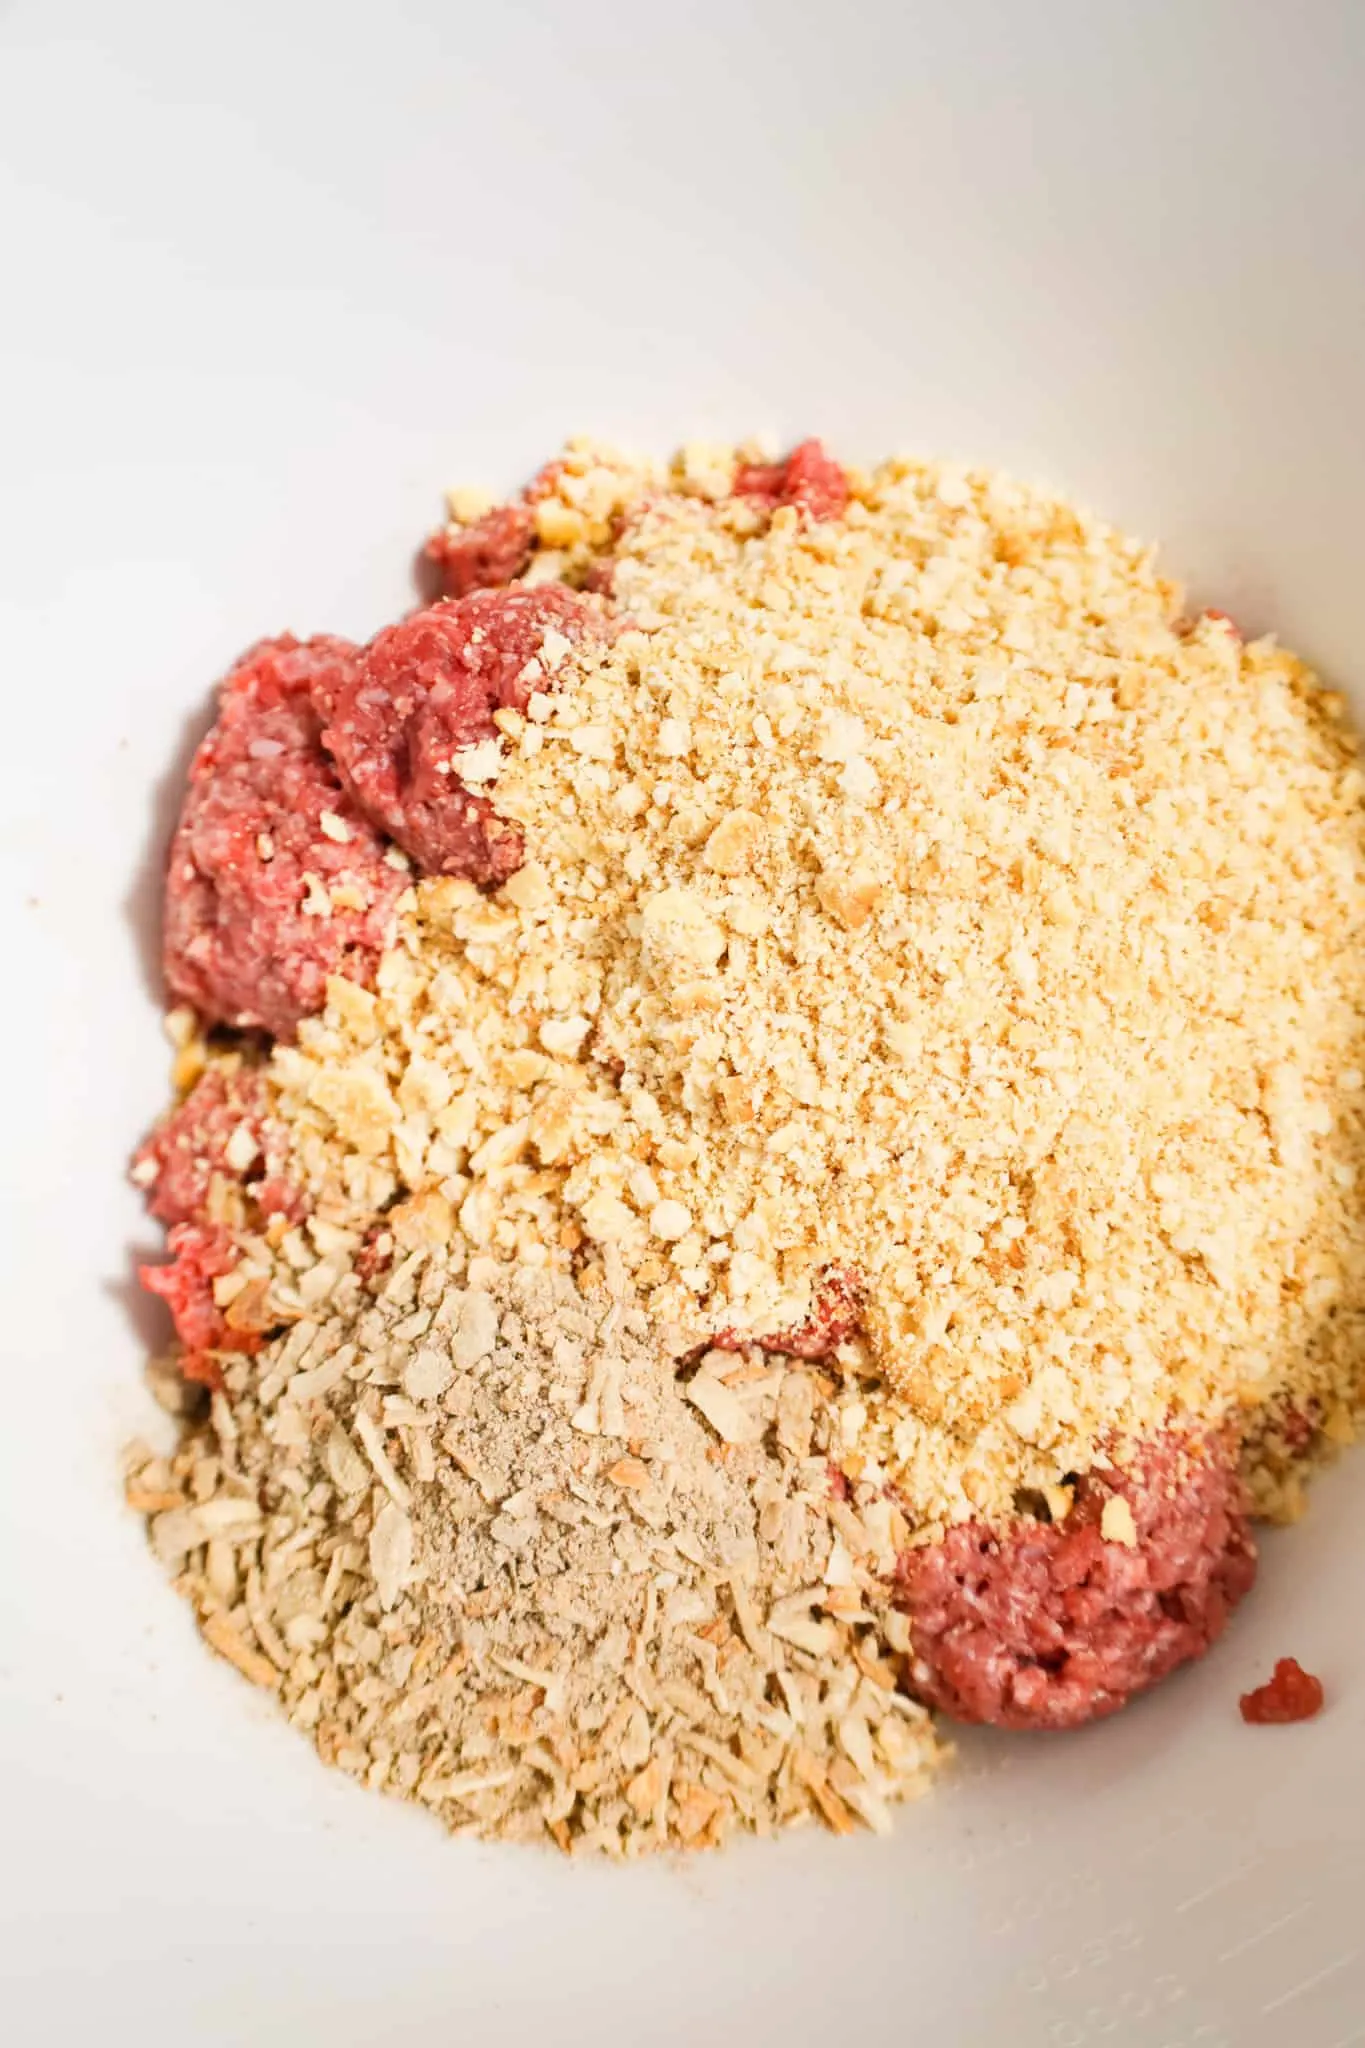 Lipton onion soup mix and crushed Ritz crackers on top of raw ground beef in a mixing bowl